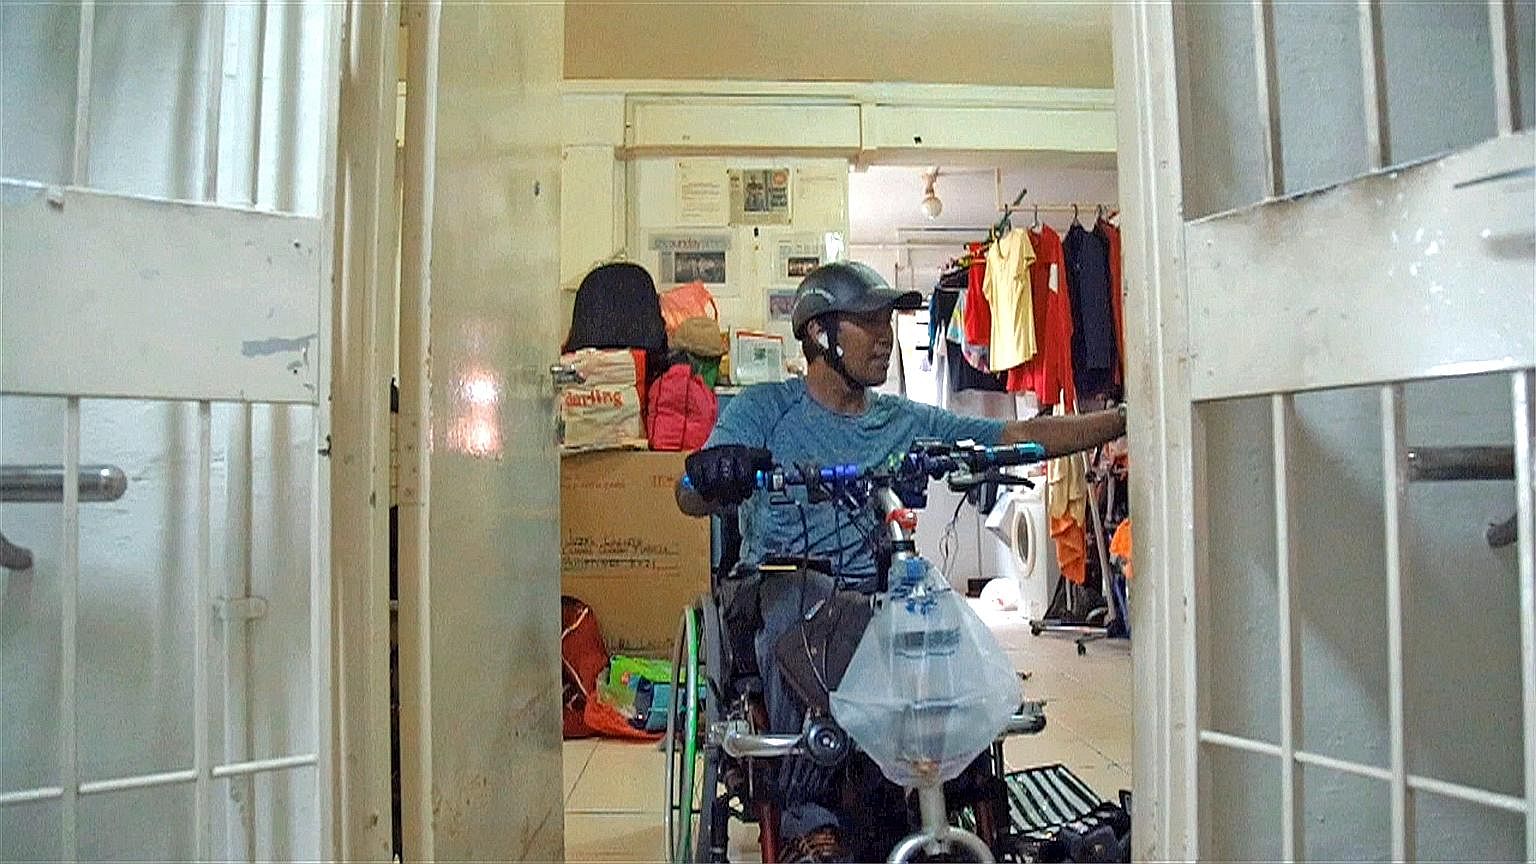 Mr Kamas Mohd, who stresses that he is not slower than other delivery men, makes as many as 10 trips a day - up to 11 hours of work - collecting and delivering food to hungry customers.